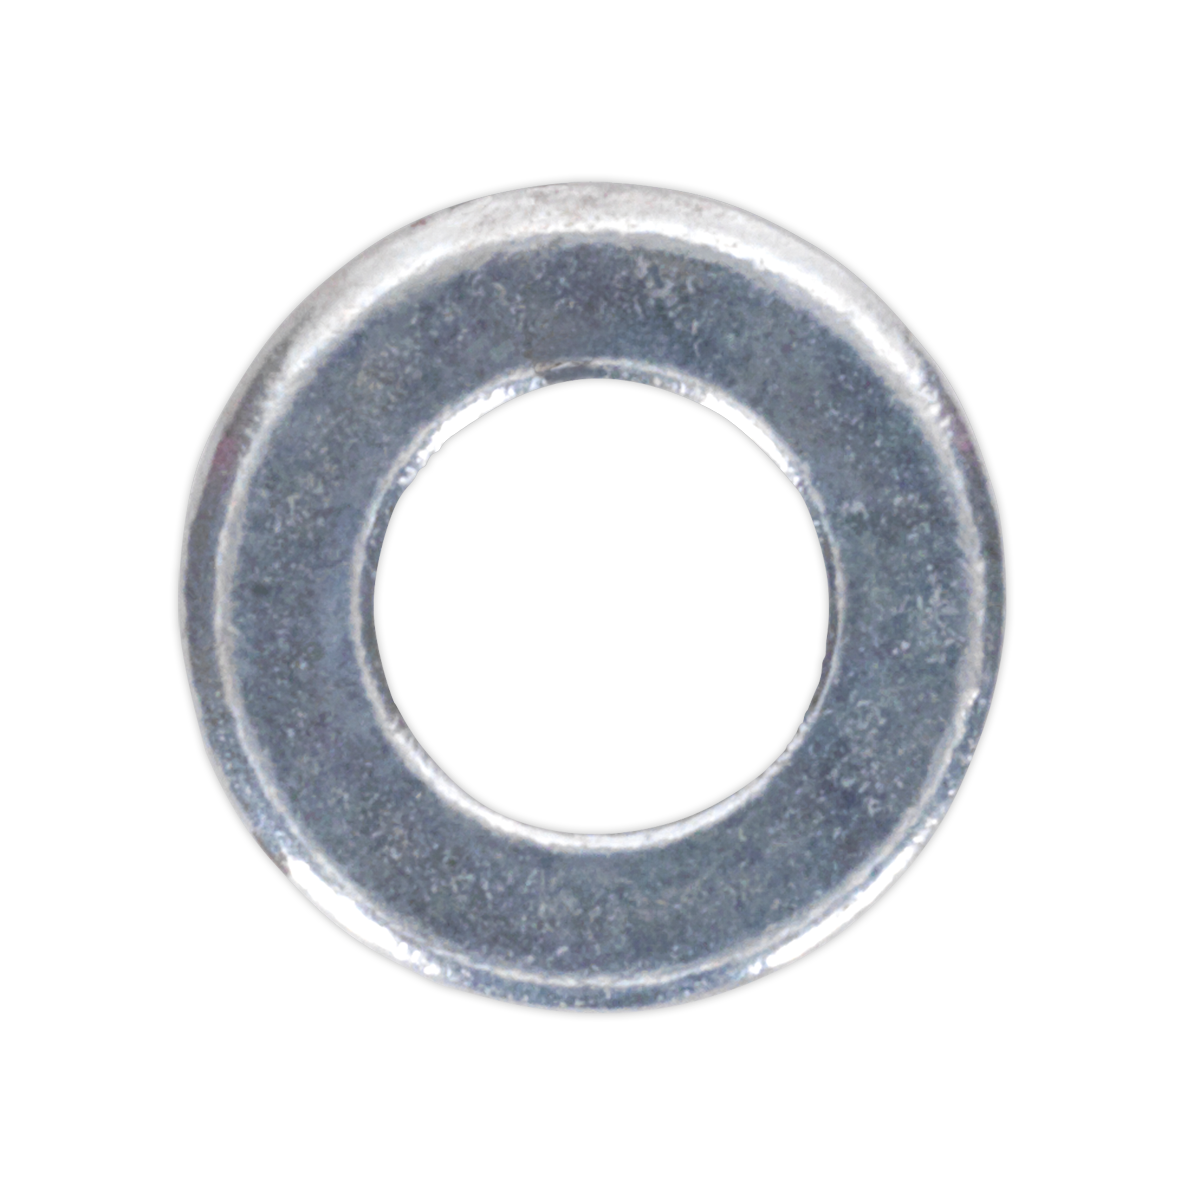 Sealey Flat Washer DIN 125 - M4 x 9mm Form A Zinc Pack of 100 FWA49